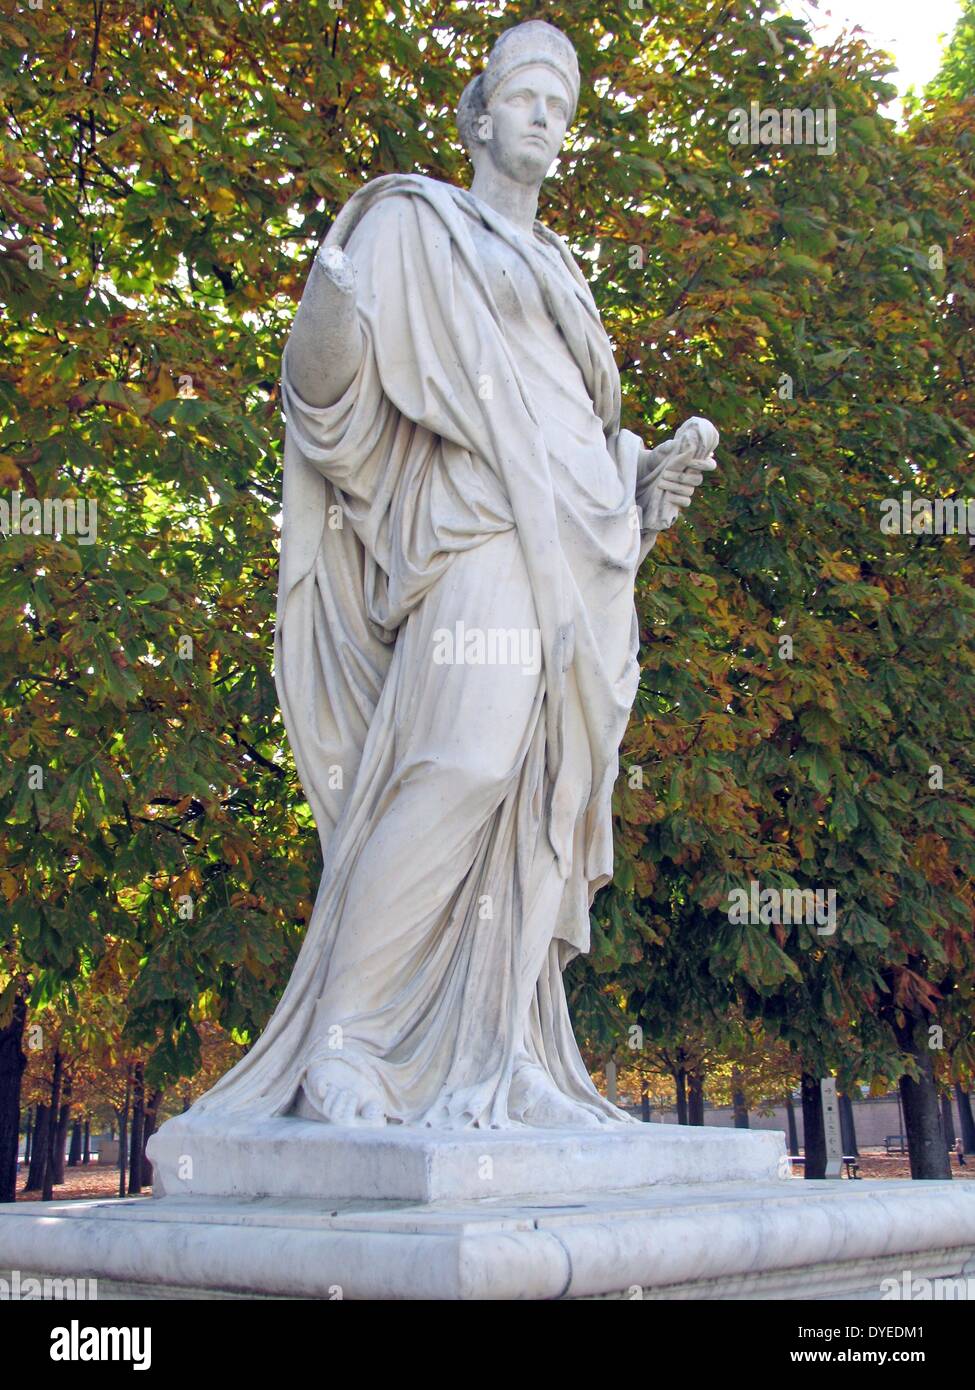 Statue of Agrippina in the Tuileries Garden 2013. Agrippina was Empress Consort after she married her uncle, the Roman Emperor Claudius. Stock Photo